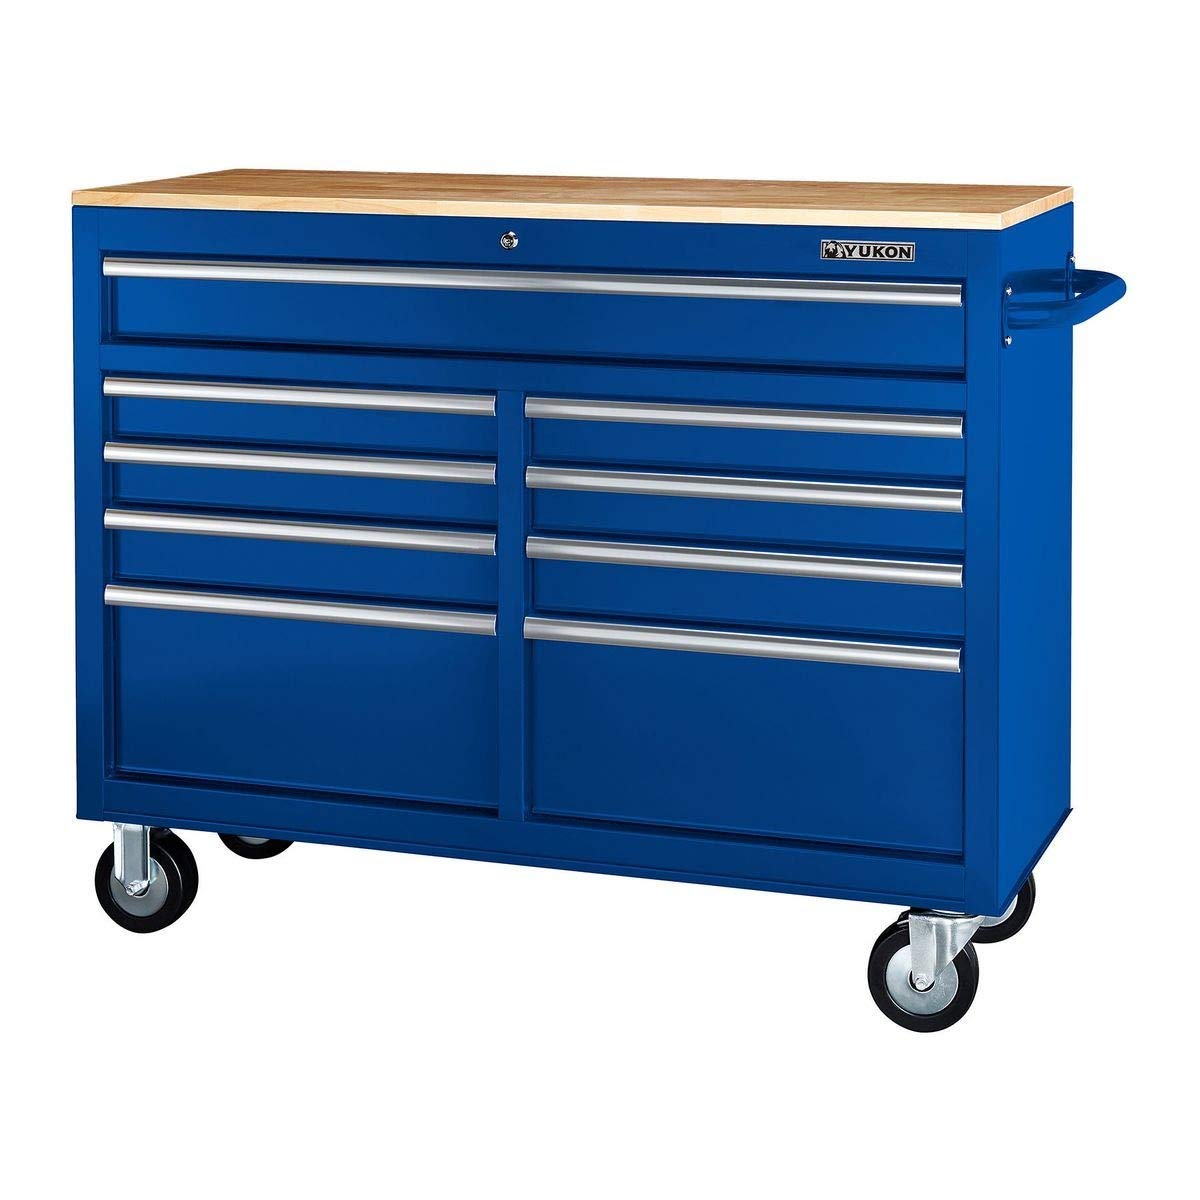 46 In. 9-Drawer Mobile Storage Cabinet With Solid Wood Top - Blue Workbench